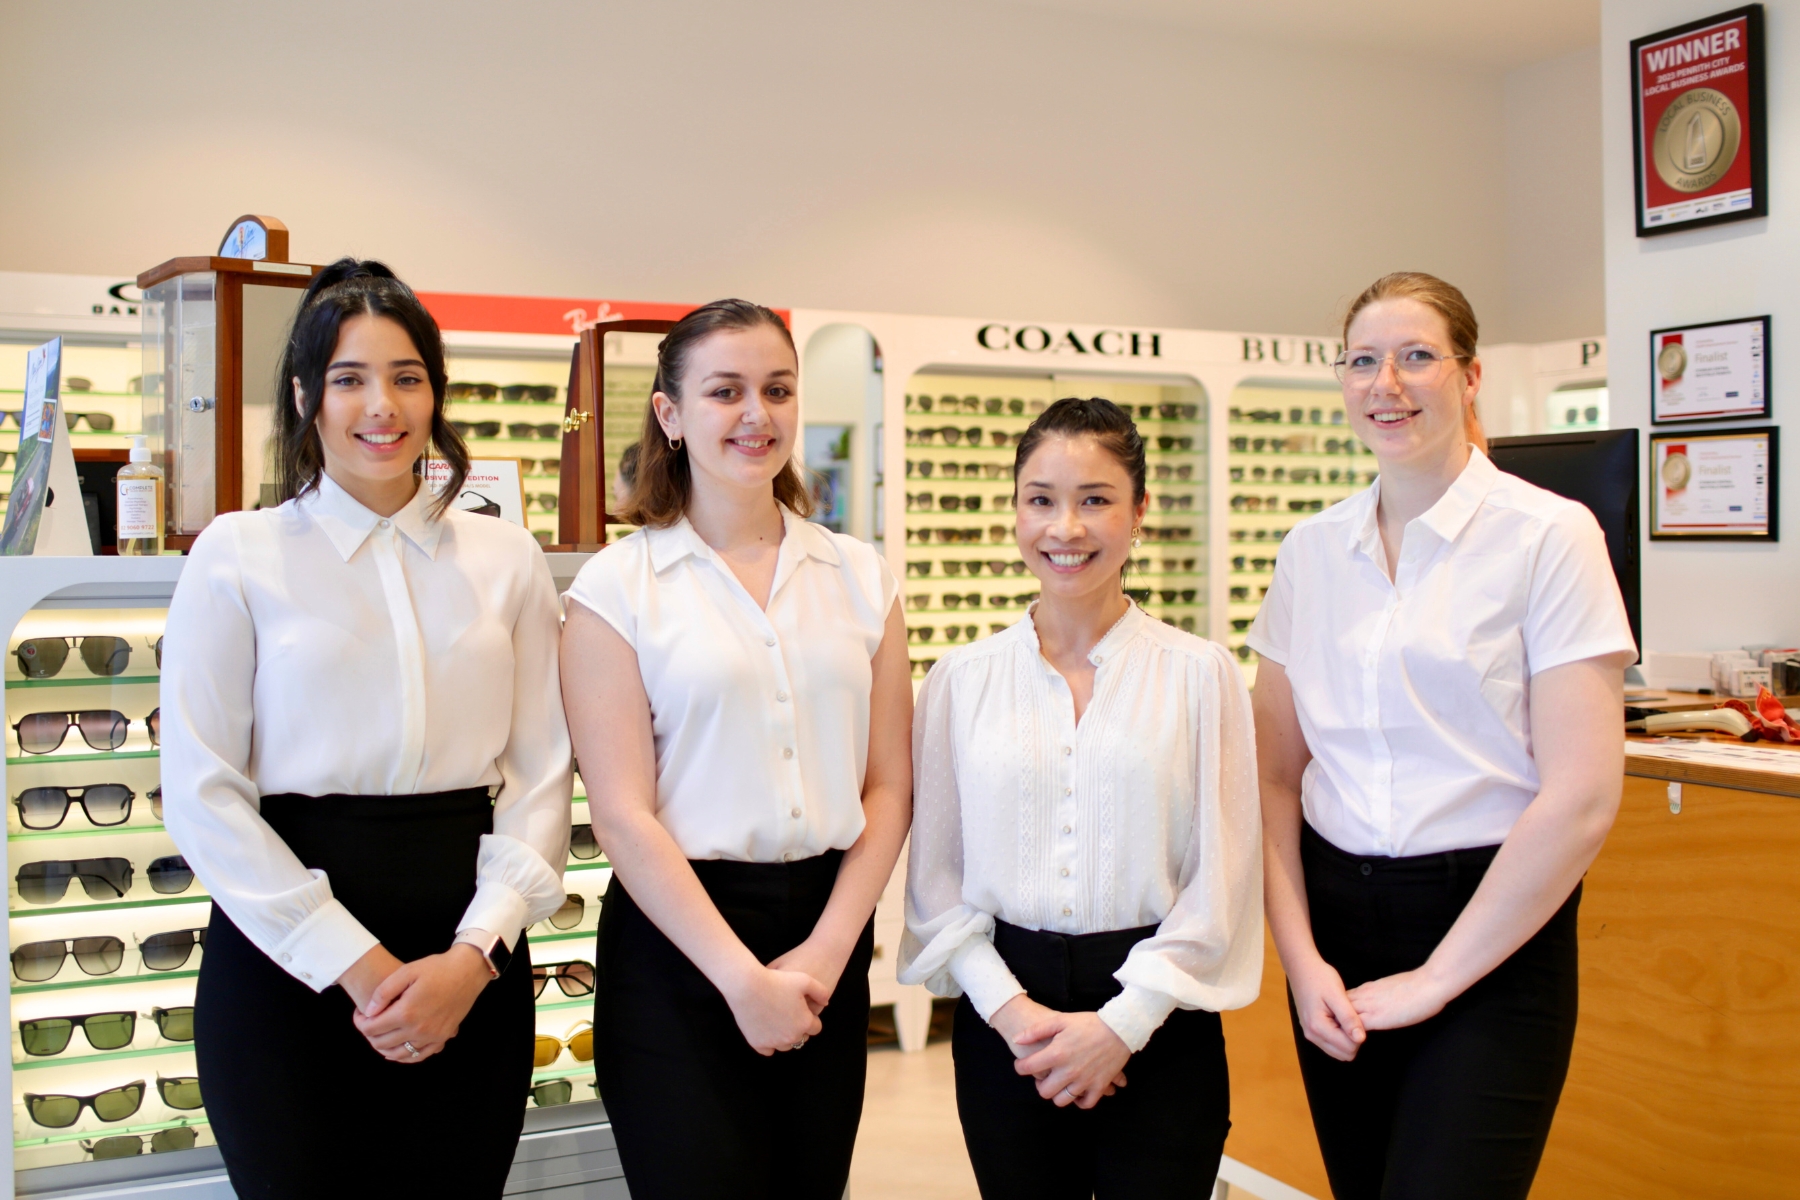 Team photos of 4 females all wearing white shirt and black pants in an optical shop